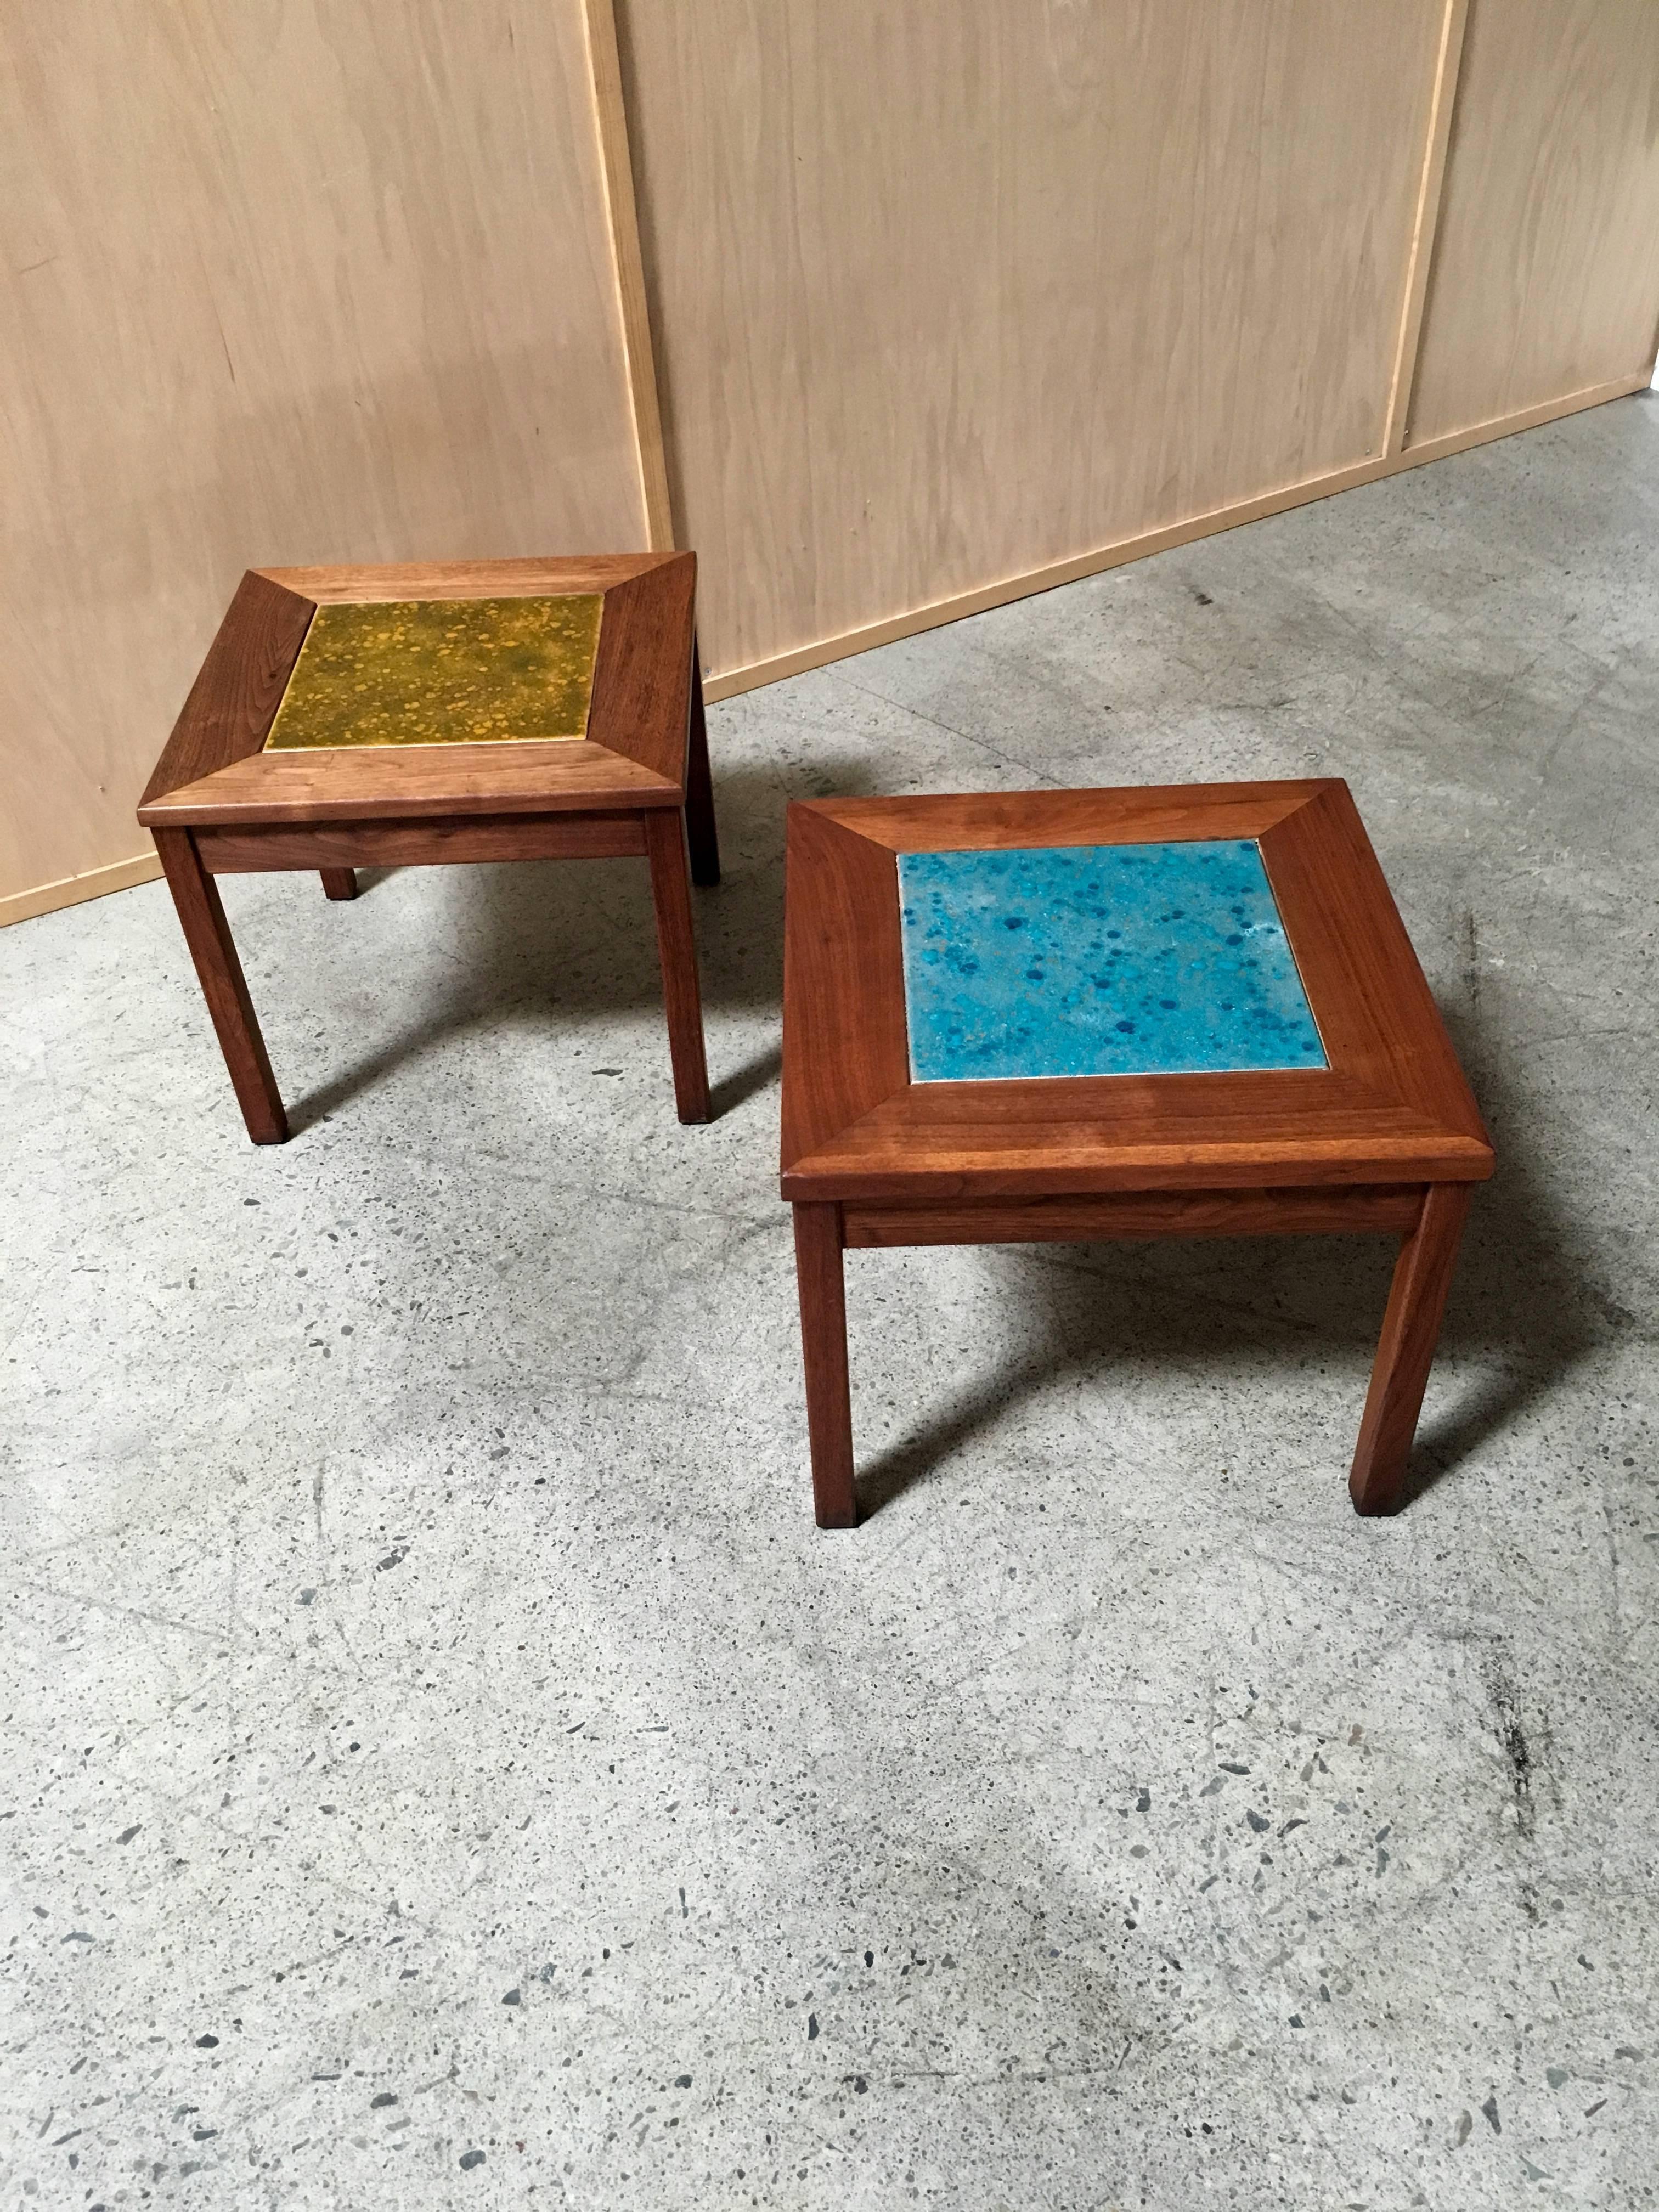 Set of walnut with enamel copper tile tables titled ‘Constellation’.